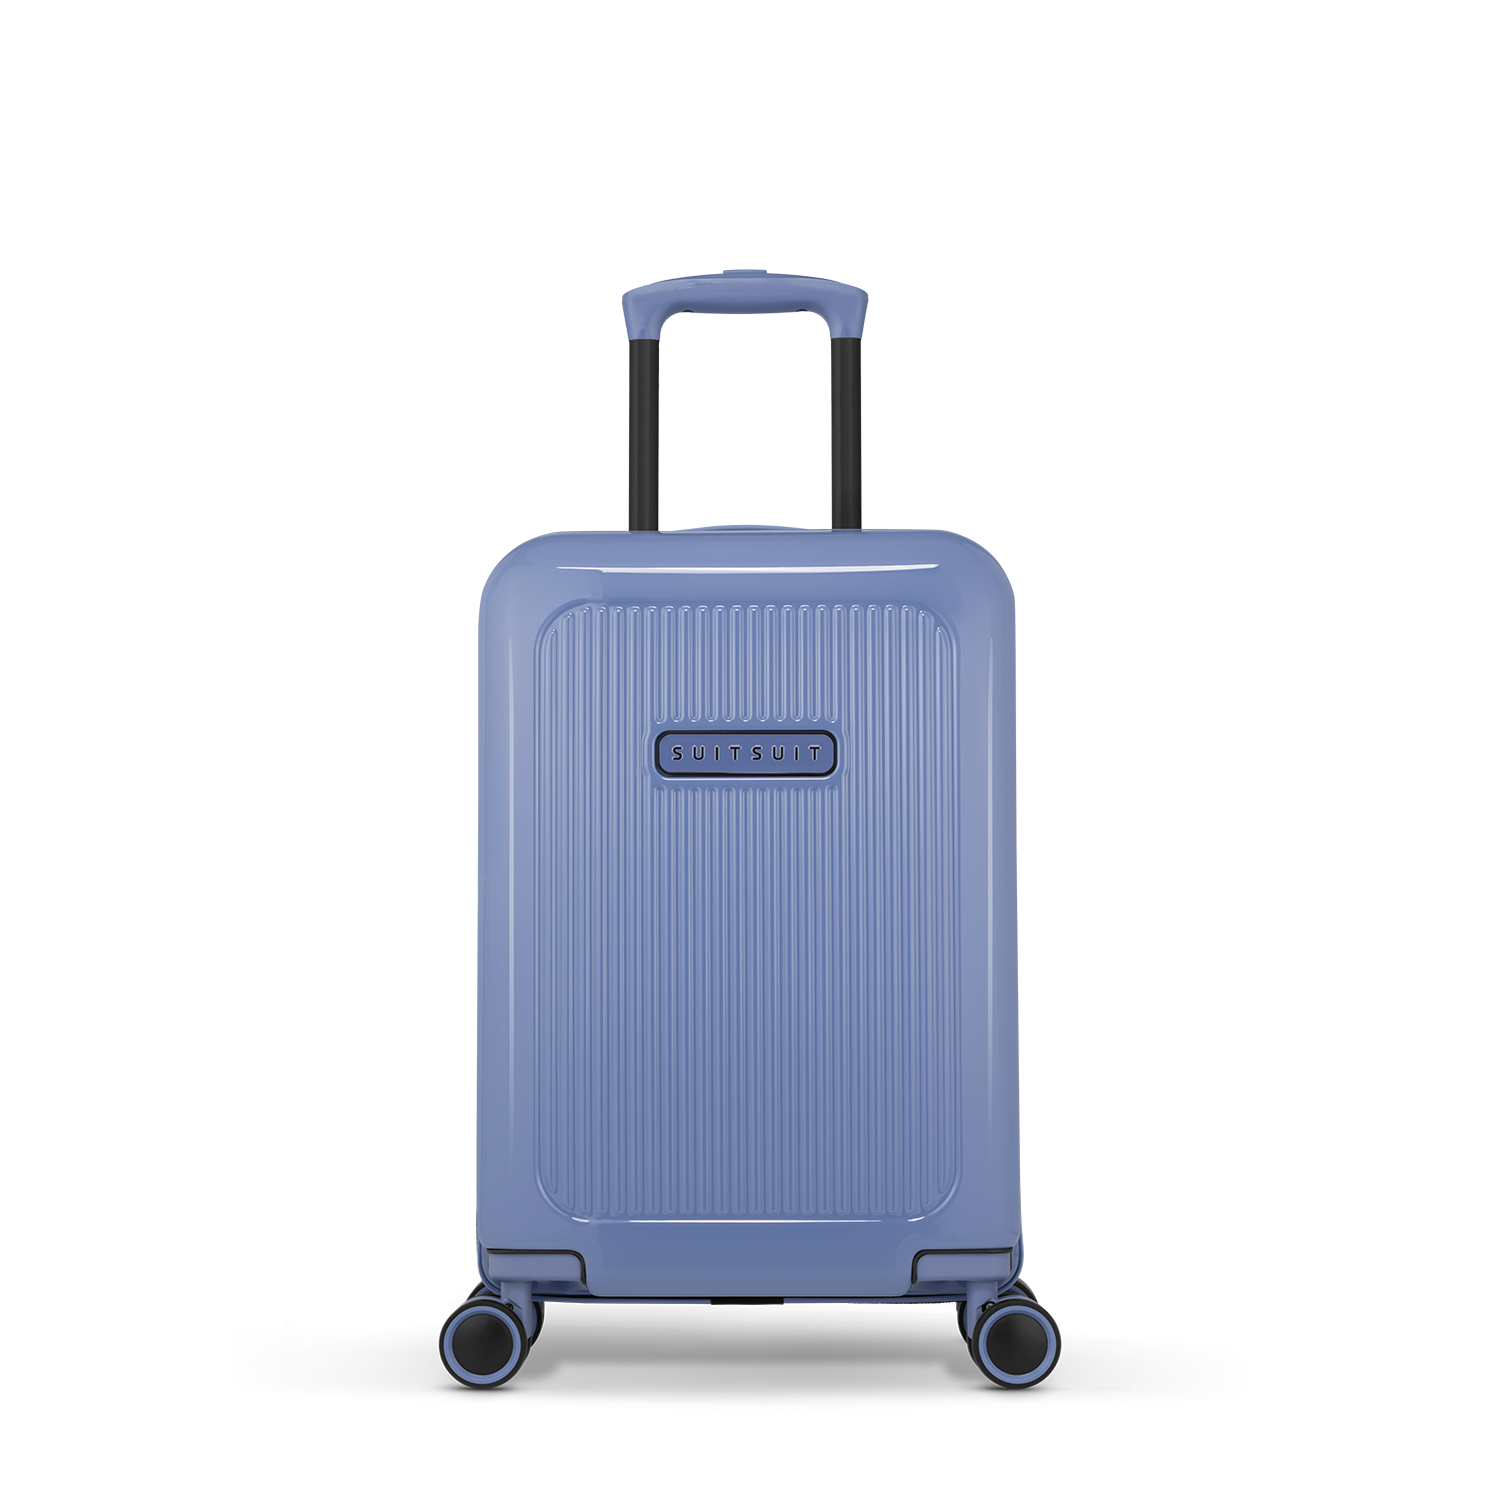 Expression - Elemental Blue - Carry-on (20 inch)